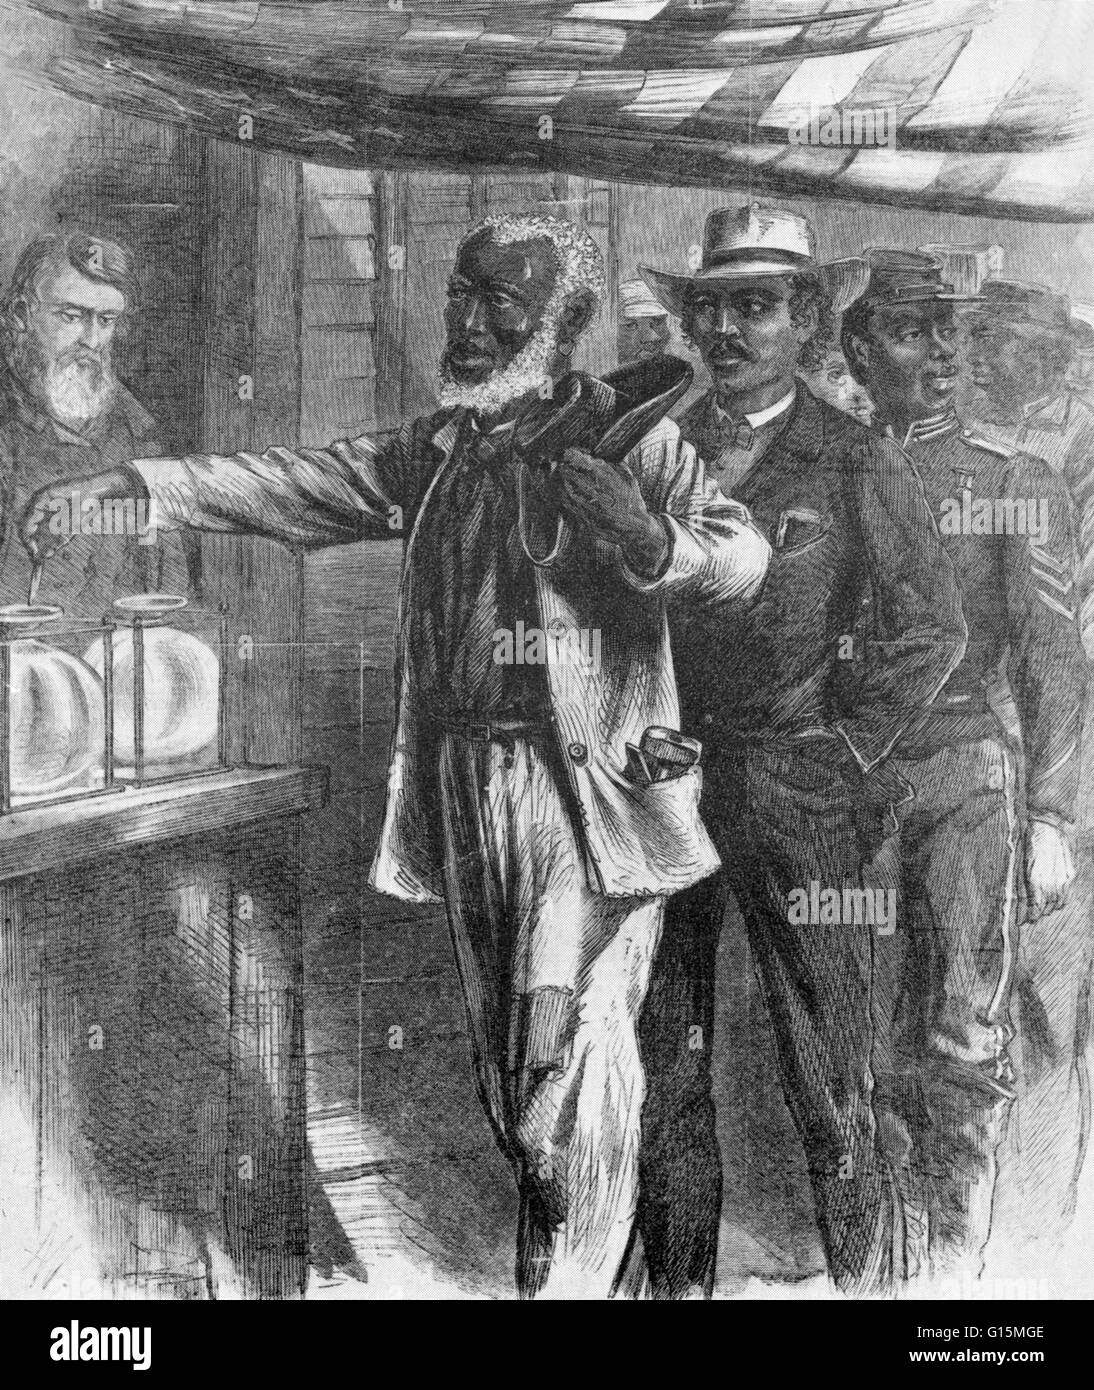 Etching entitled and captioned: "First Black Vote. Though there would be still so many rivers to cross and mountains to climb, this was indeed a glorious, inspiring, landmark event. We can sense the many years this gray-haired man has waited for this mome Stock Photo